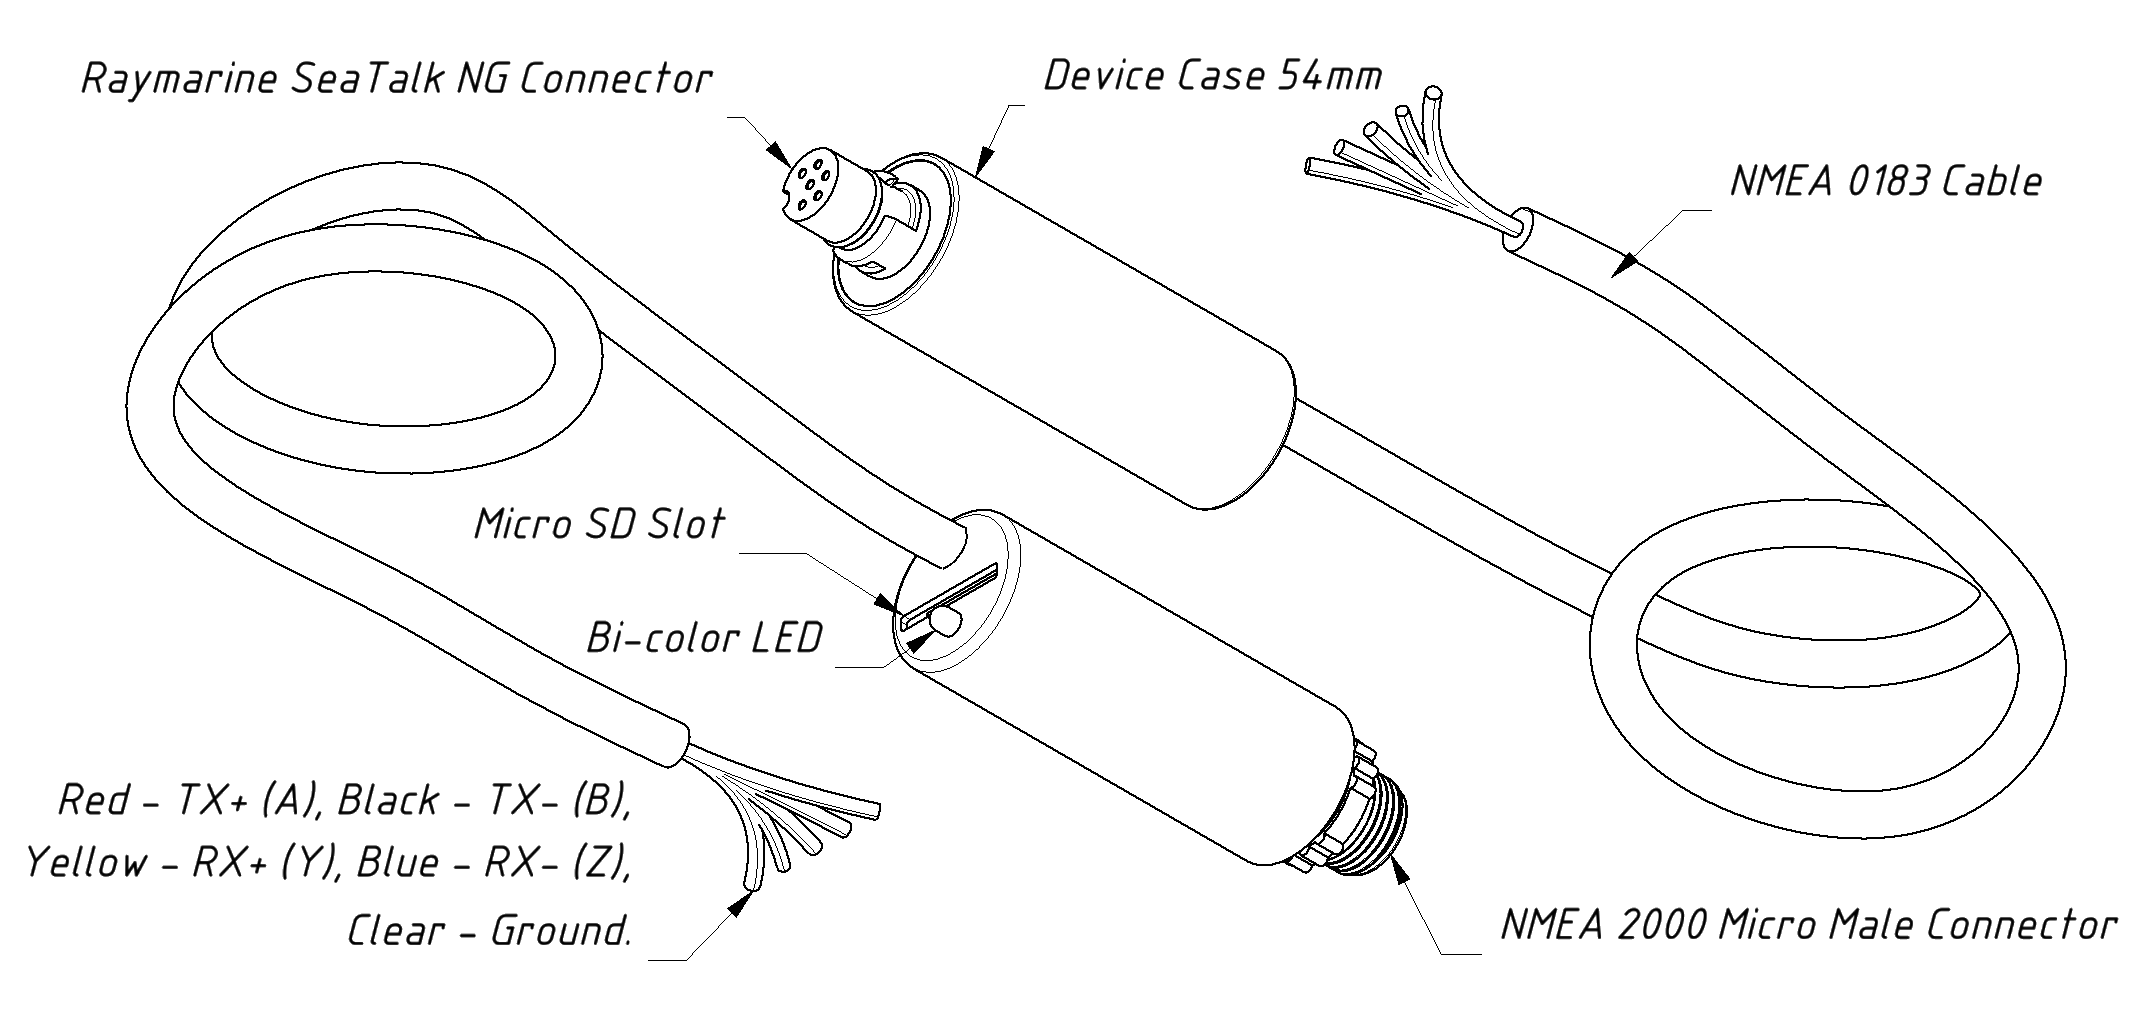 Drawing of YDNG-02N (left) and YDNG-02R (right) models of Gateway